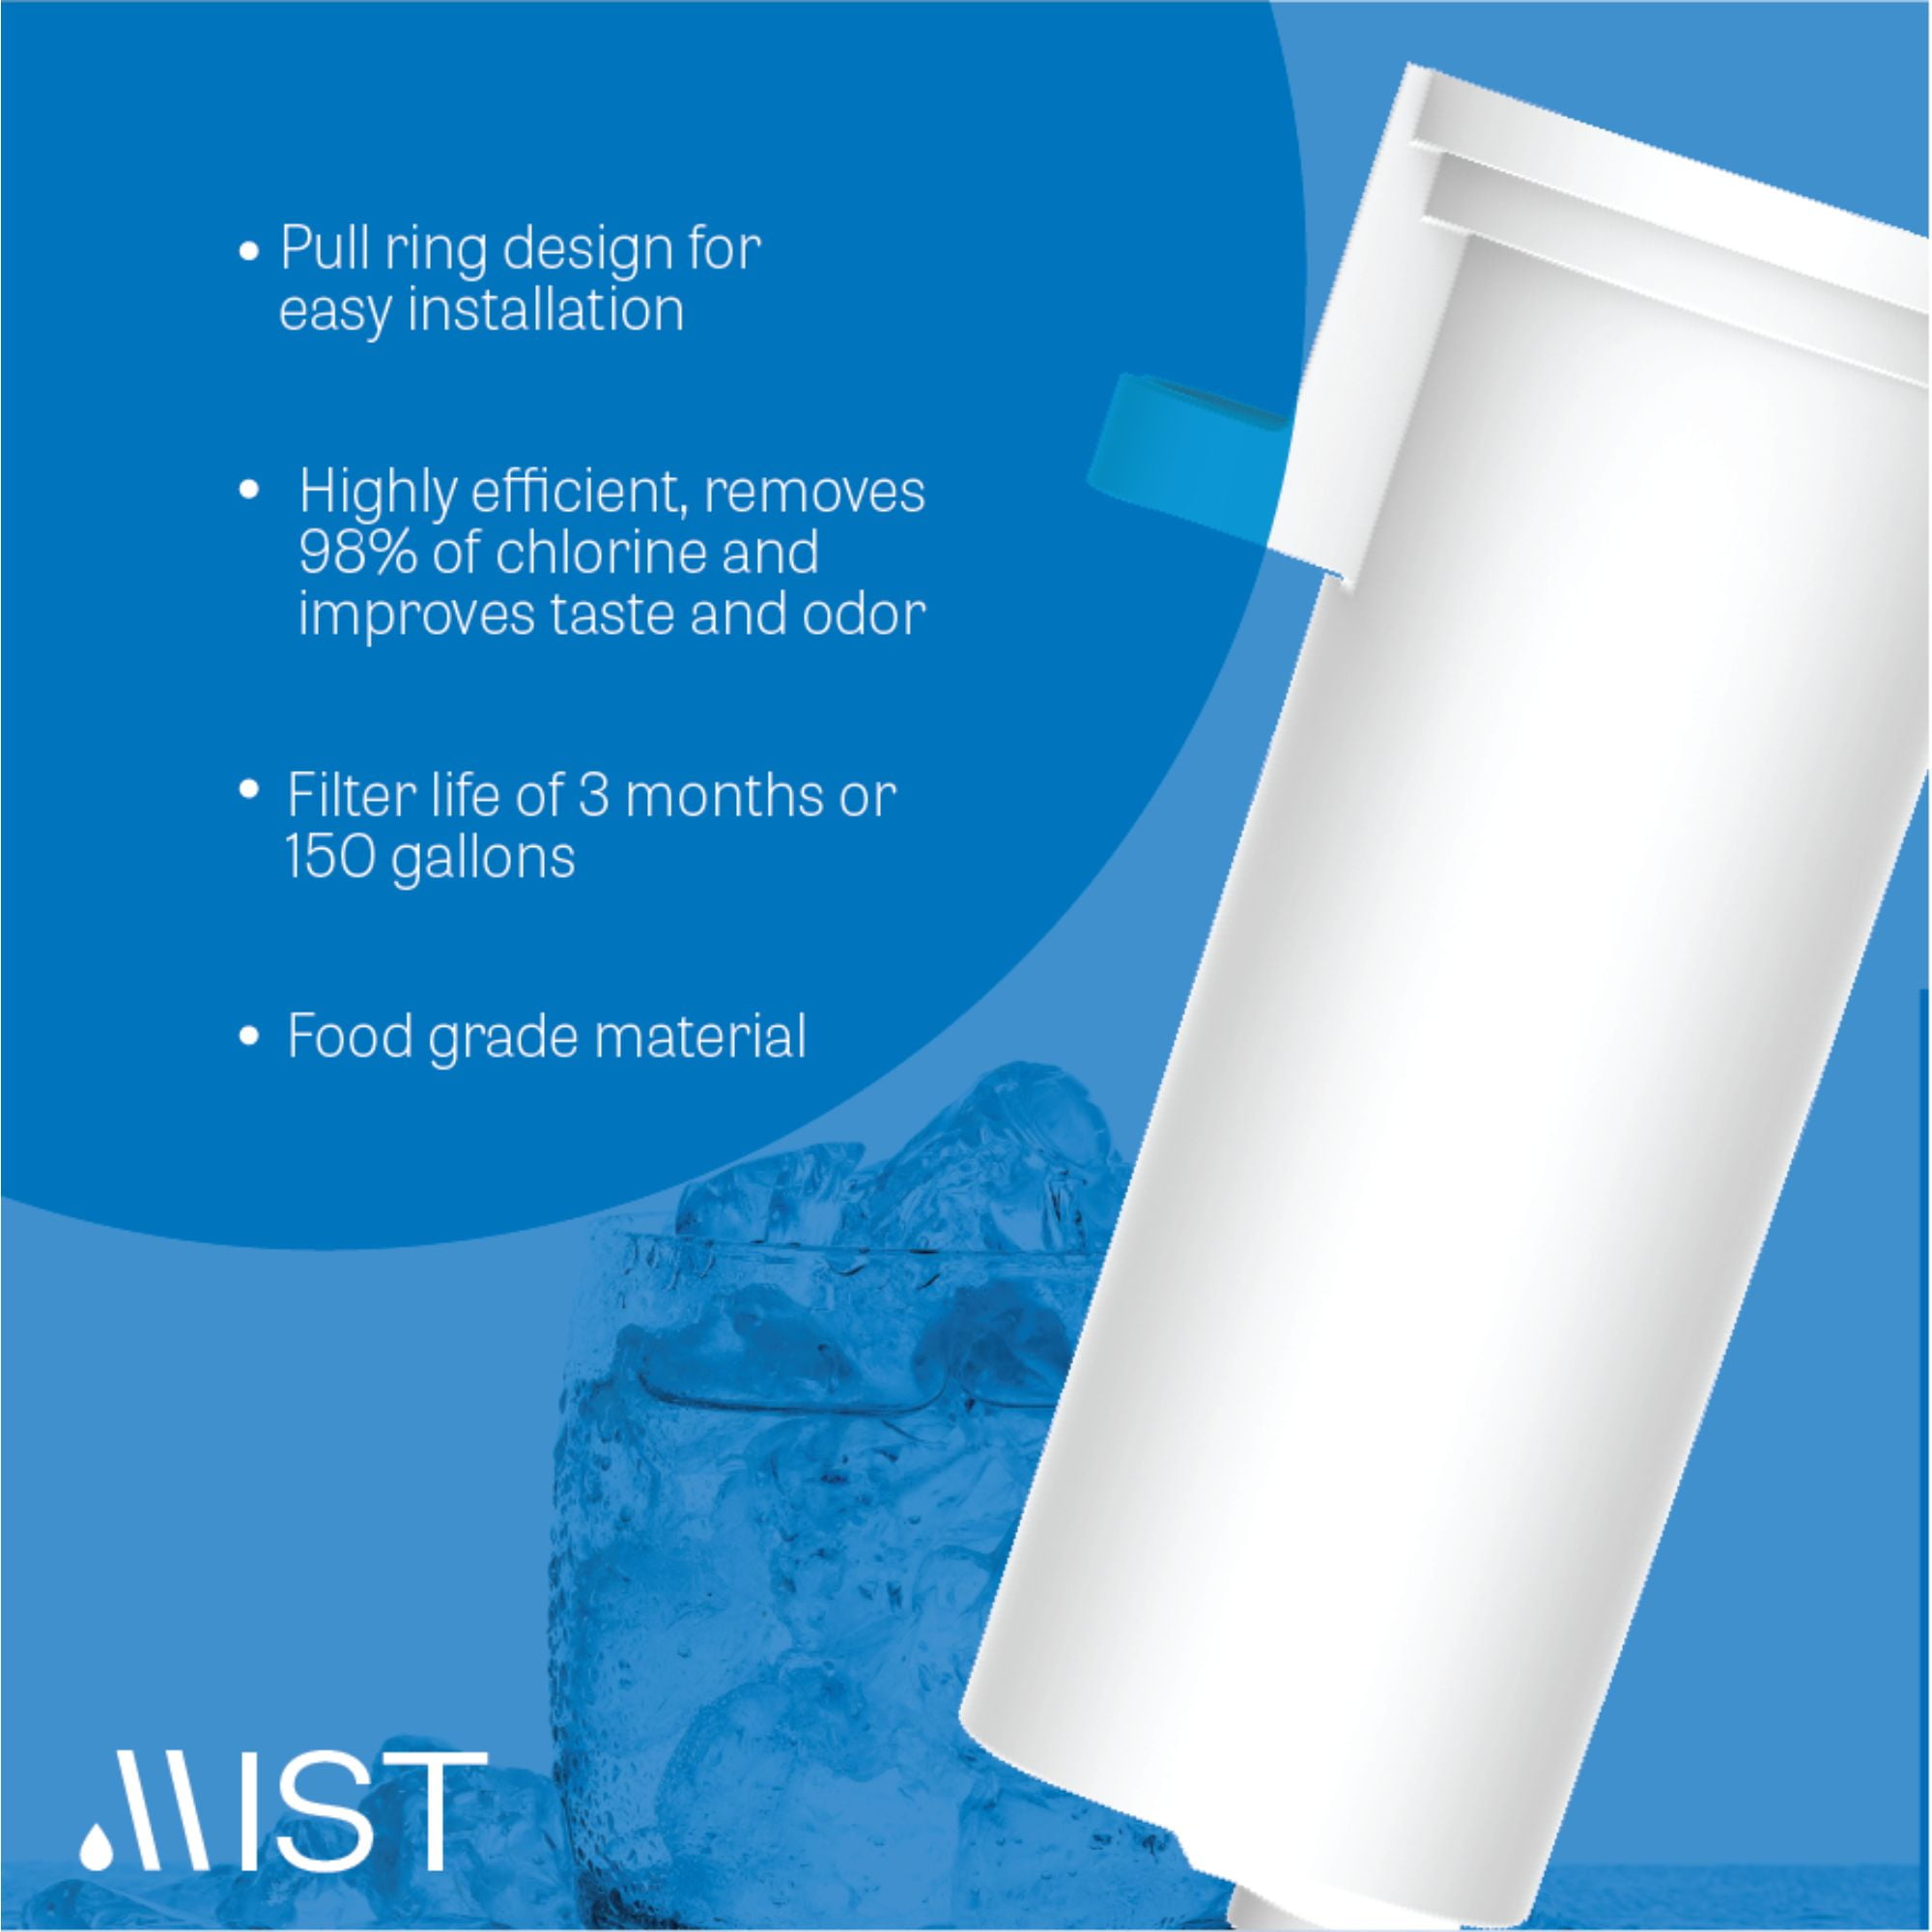 GE PROFILE™ OPAL™ NUGGET ICE MAKER - WATER FILTER ACCESSORY - P4INKFILTR -  GE Appliances